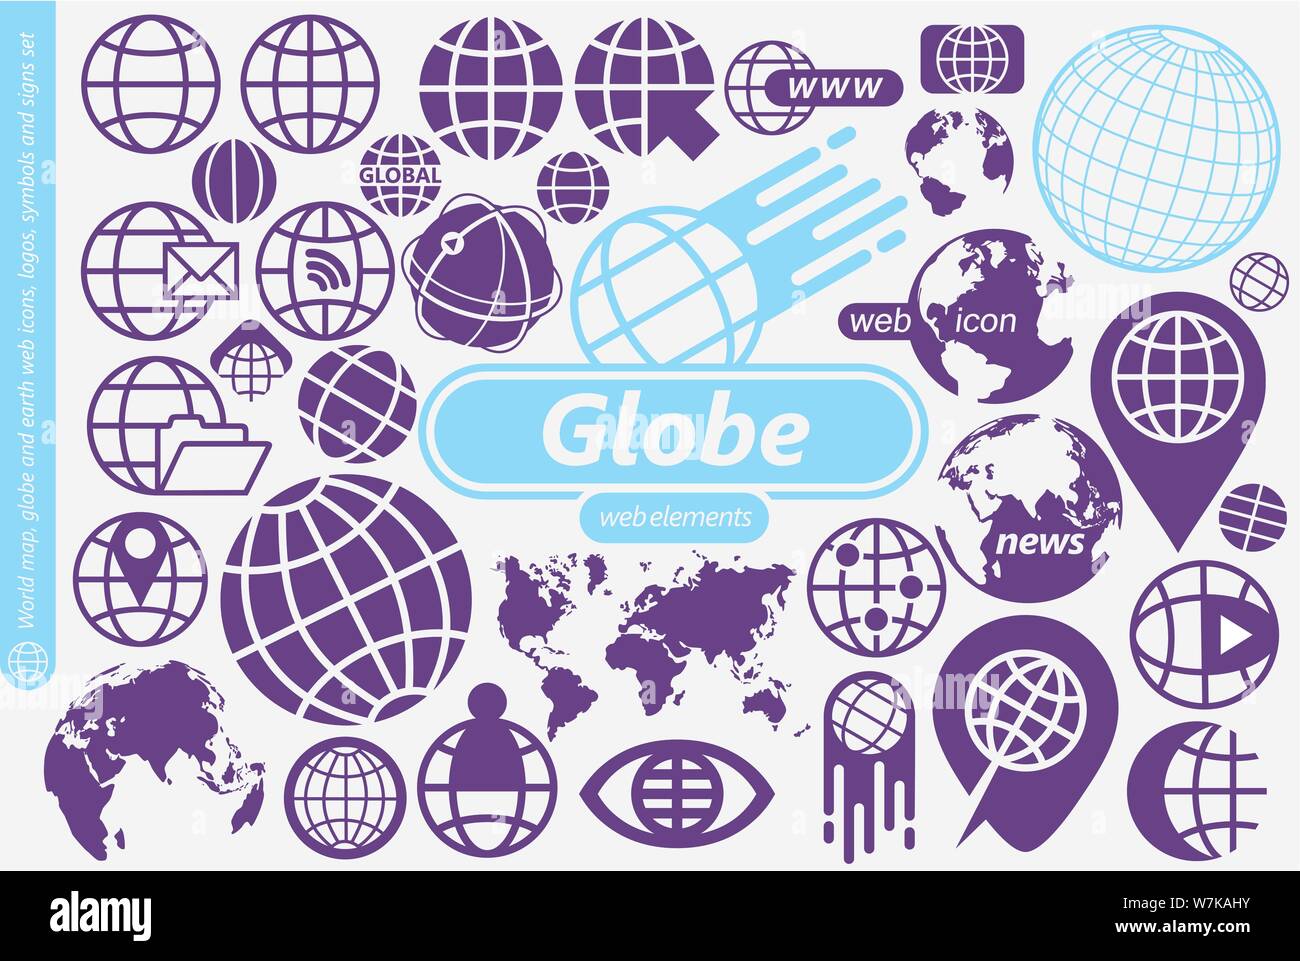 Globe, world map and earth symbols, icons, logos and design elements collection. Modern web icons set for mobile and web apps. Stock Vector